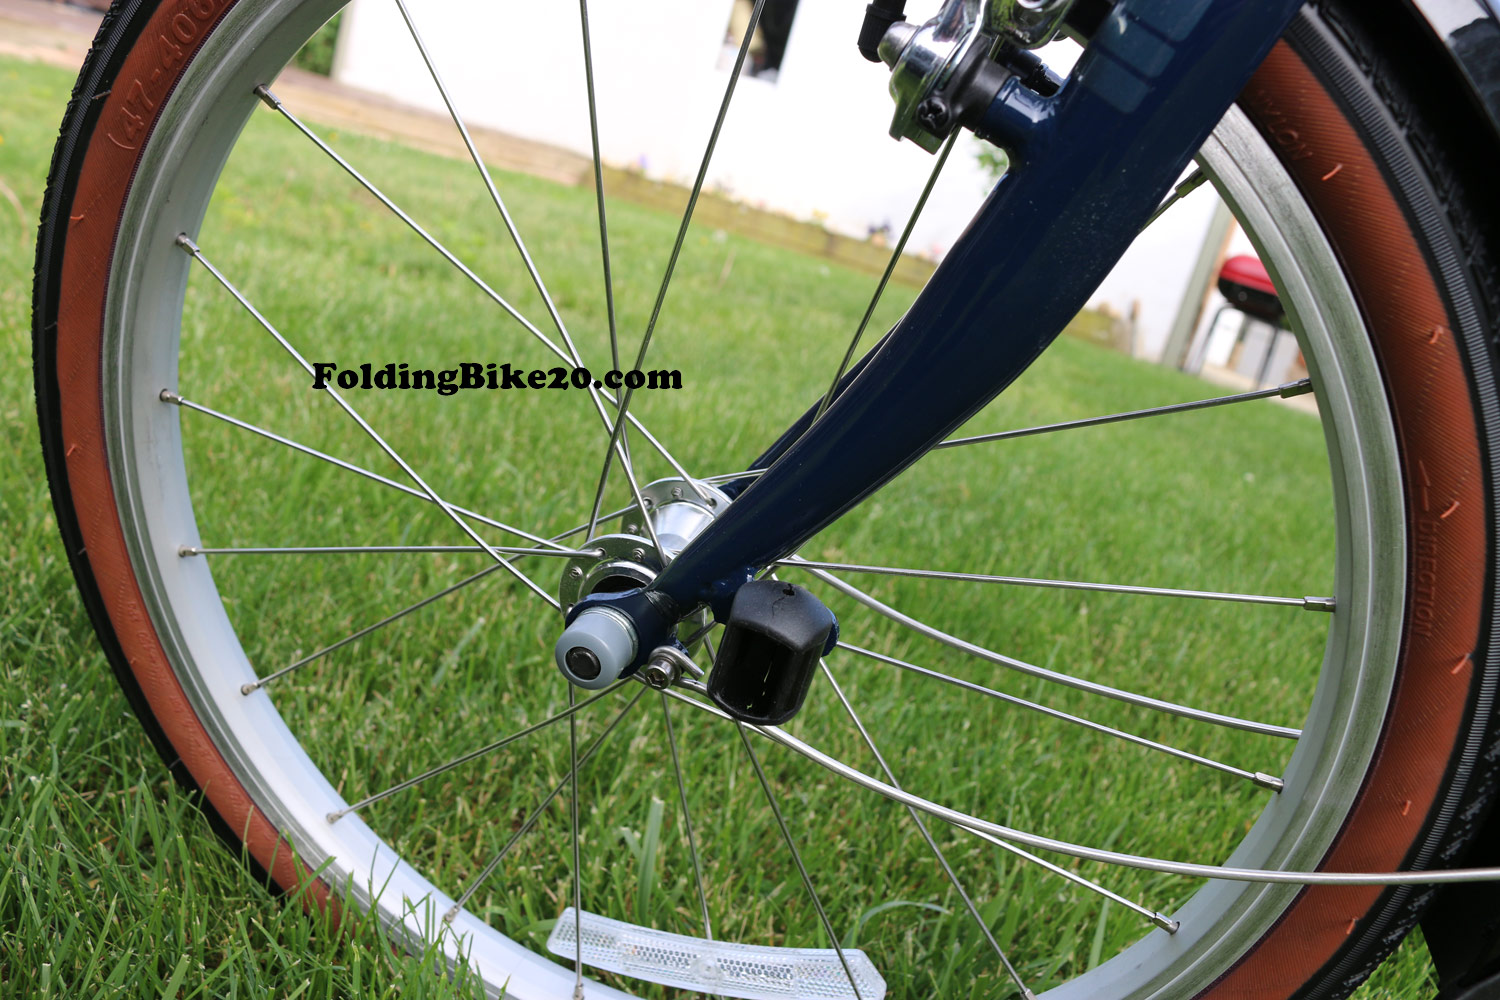 Dahon Speed D7 Folding Bike Review - An Easy, Compact and ...